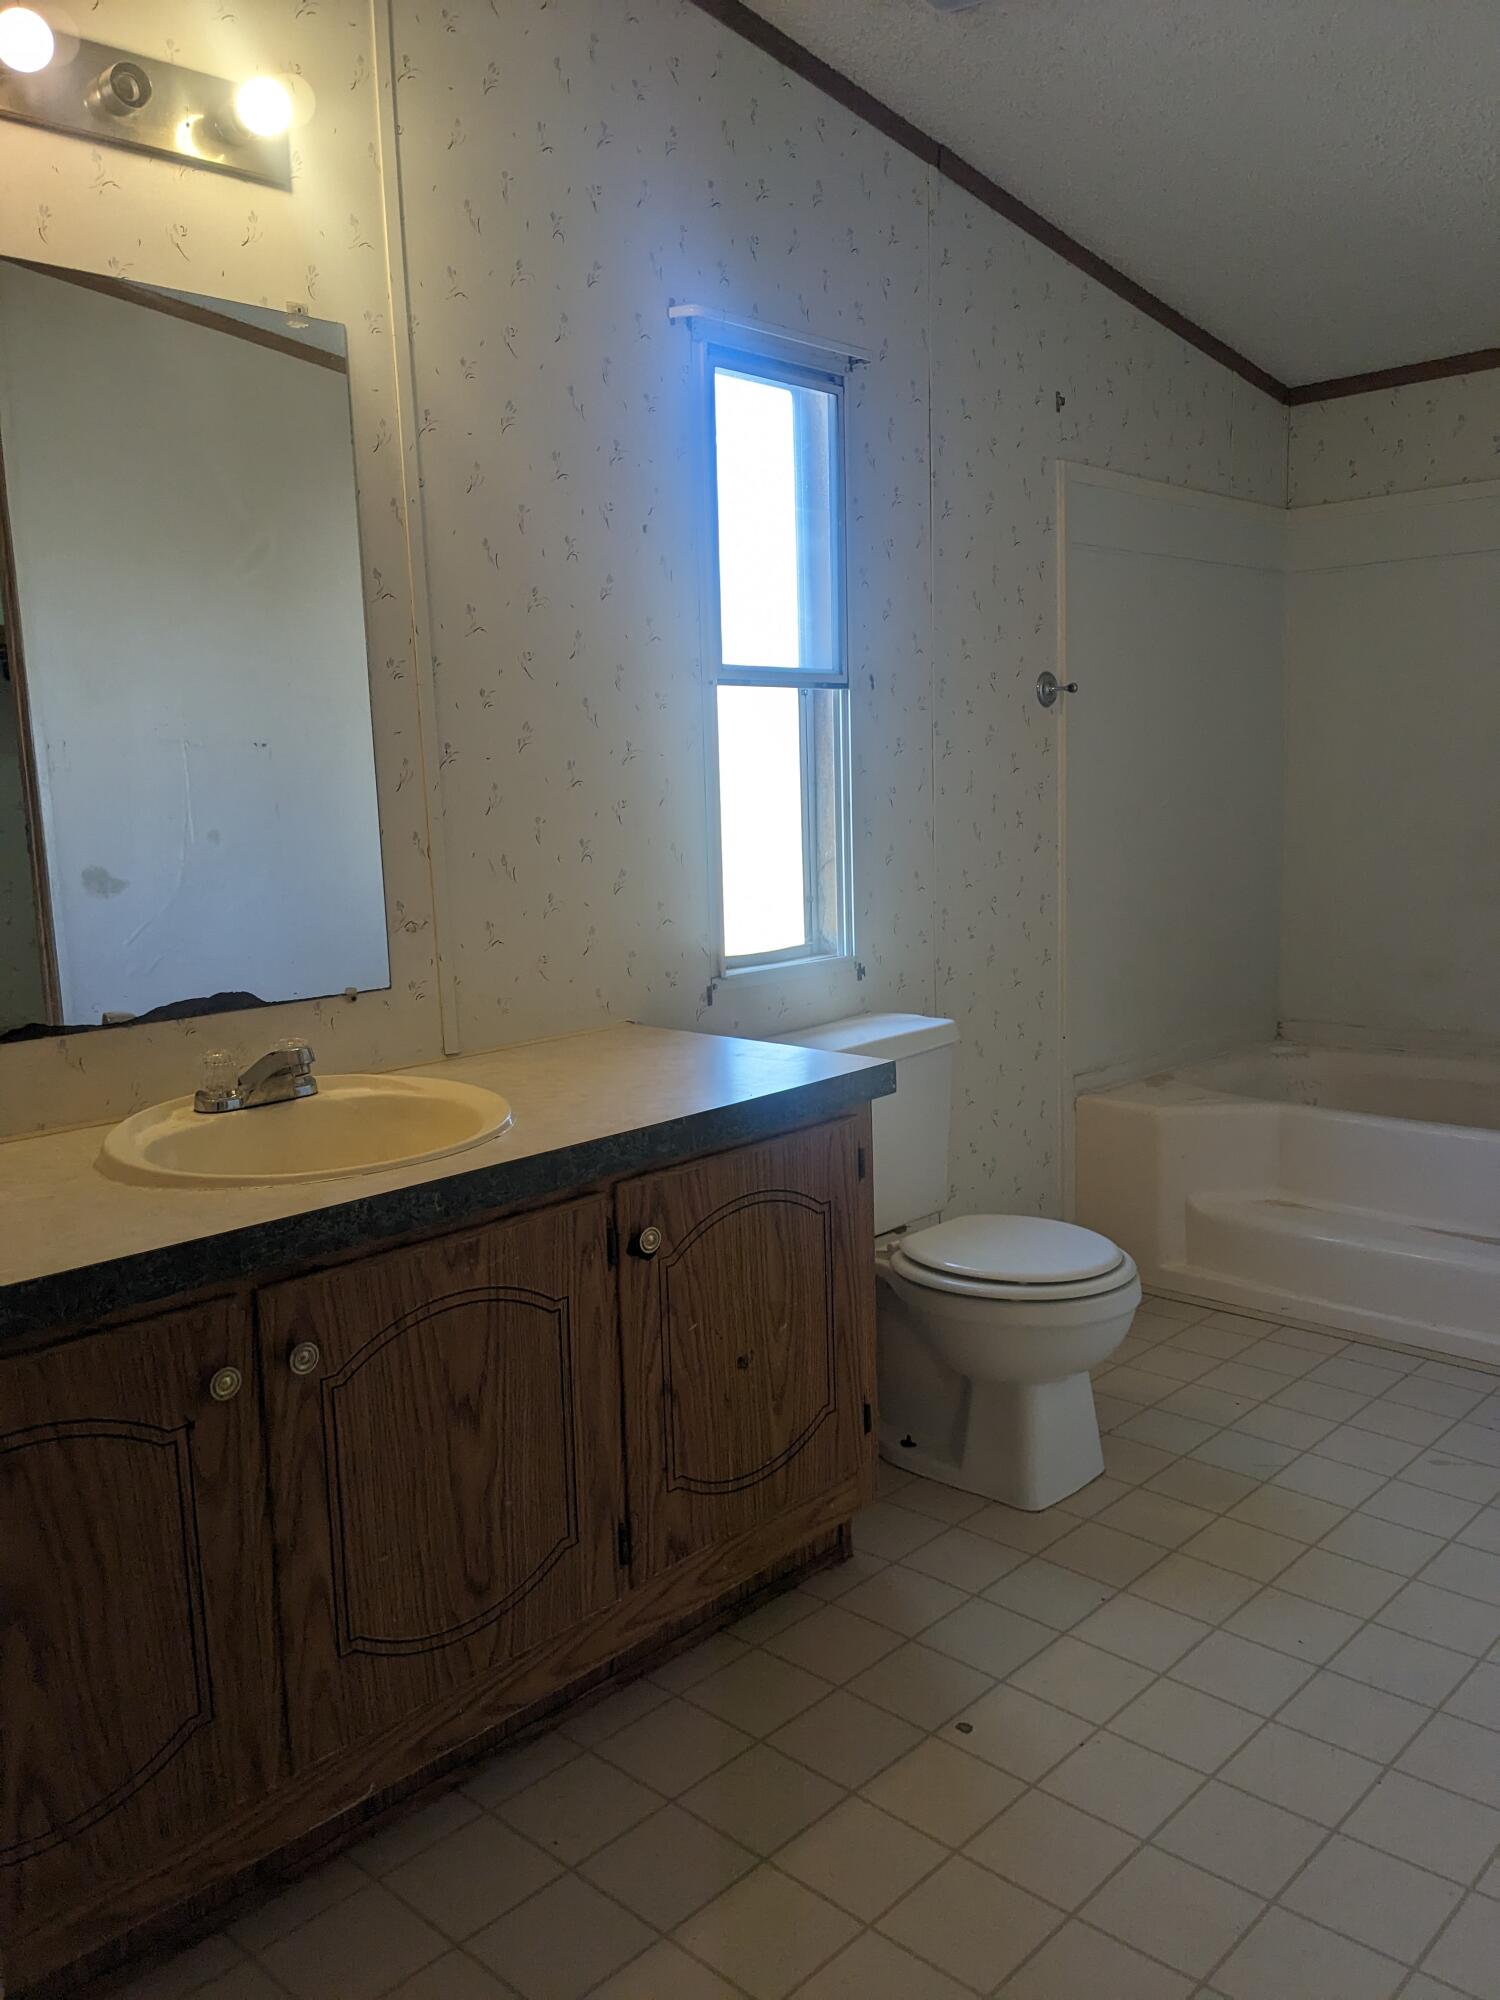 500 Ash Street, Truth or Consequences, New Mexico 87901, 3 Bedrooms Bedrooms, ,2 BathroomsBathrooms,Residential,For Sale,500 Ash Street,1059698